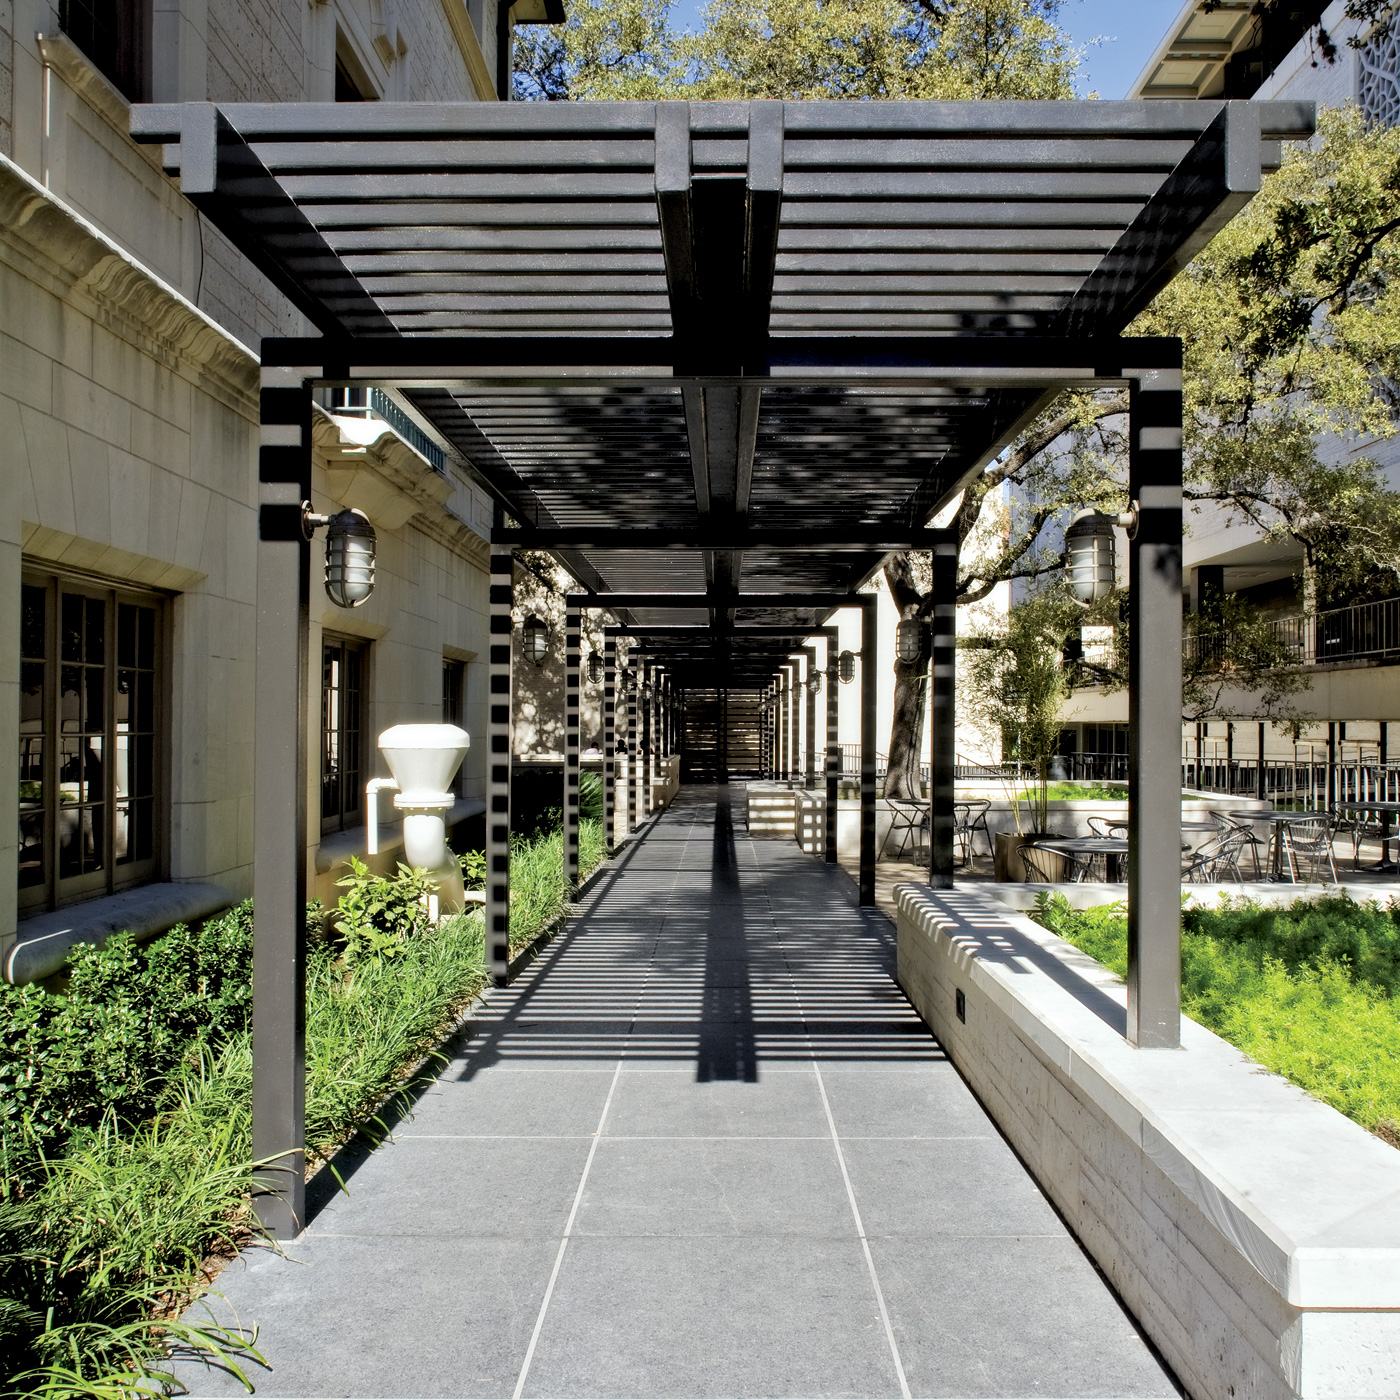 An awning spanning above a walkway that boarders university buildings.